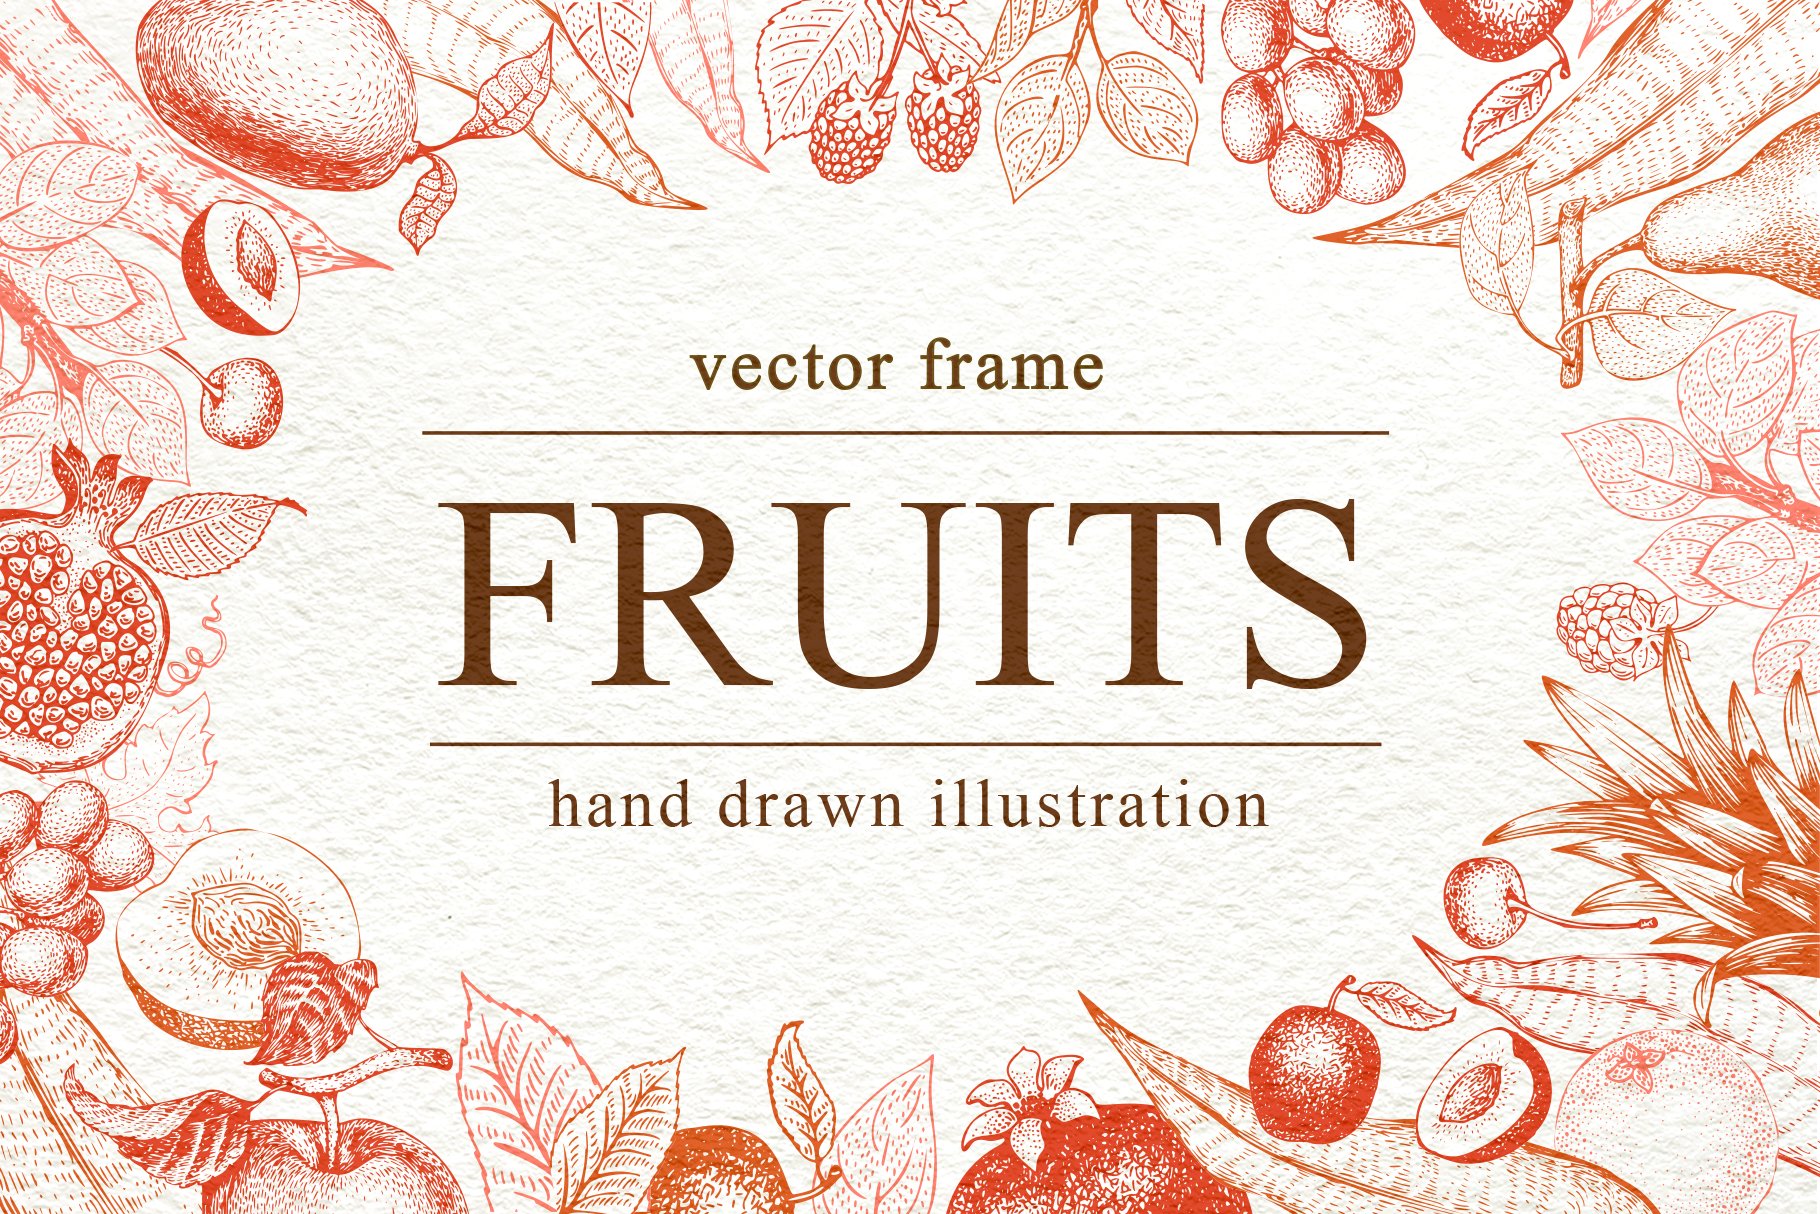 Fruits Vector Frame cover image.